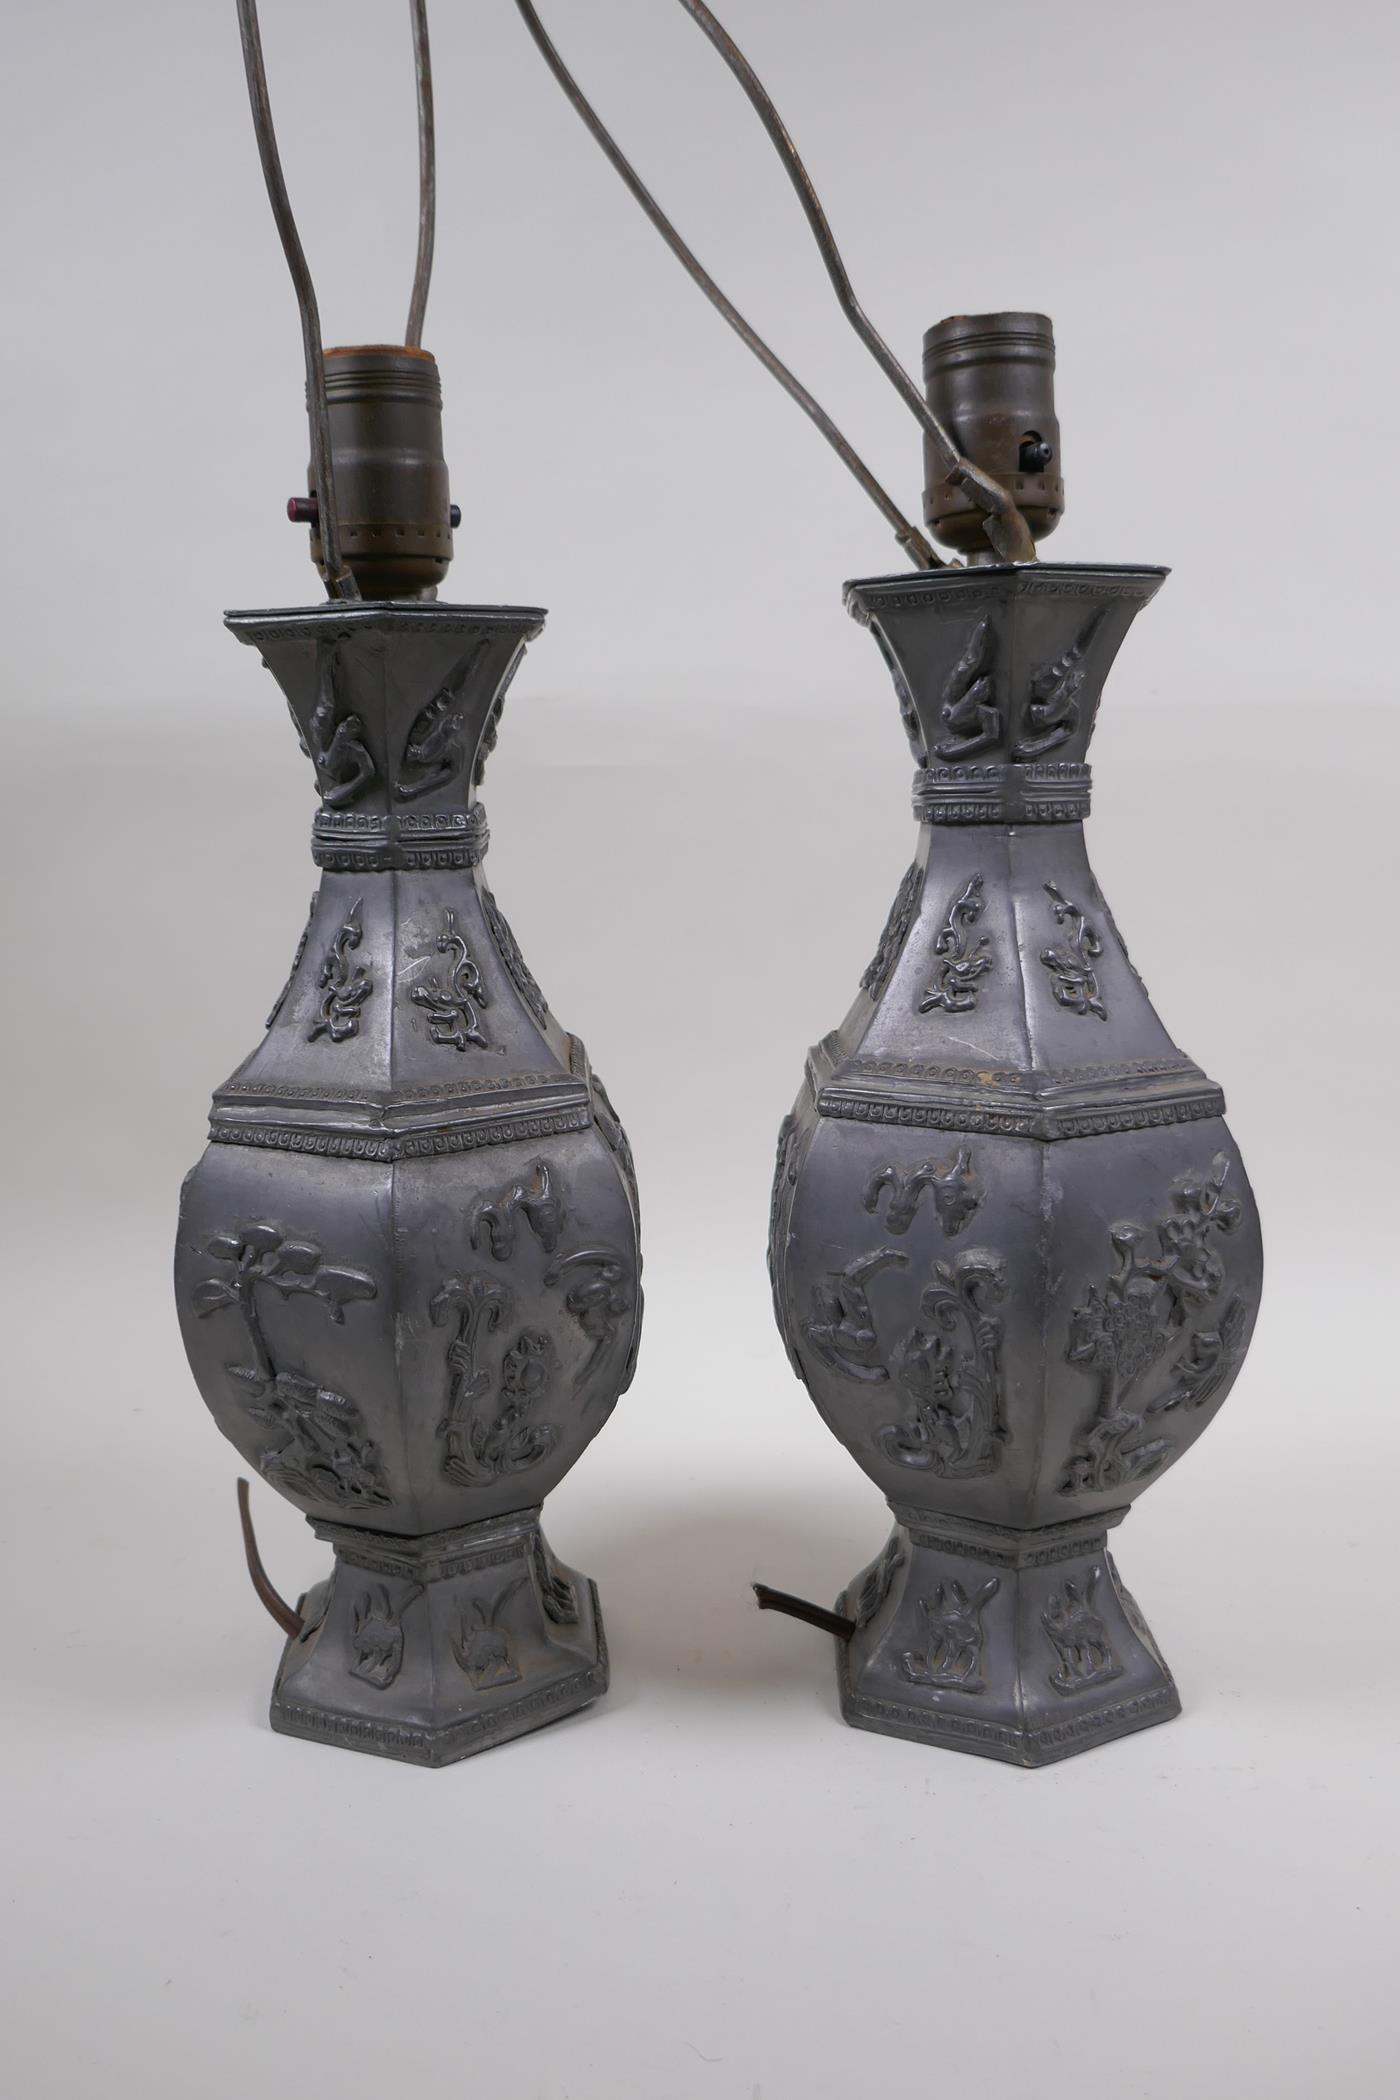 A pair of Chinese pewter lamps decorated with mythical creatures and auspicious symbols, 35cm high - Image 4 of 4